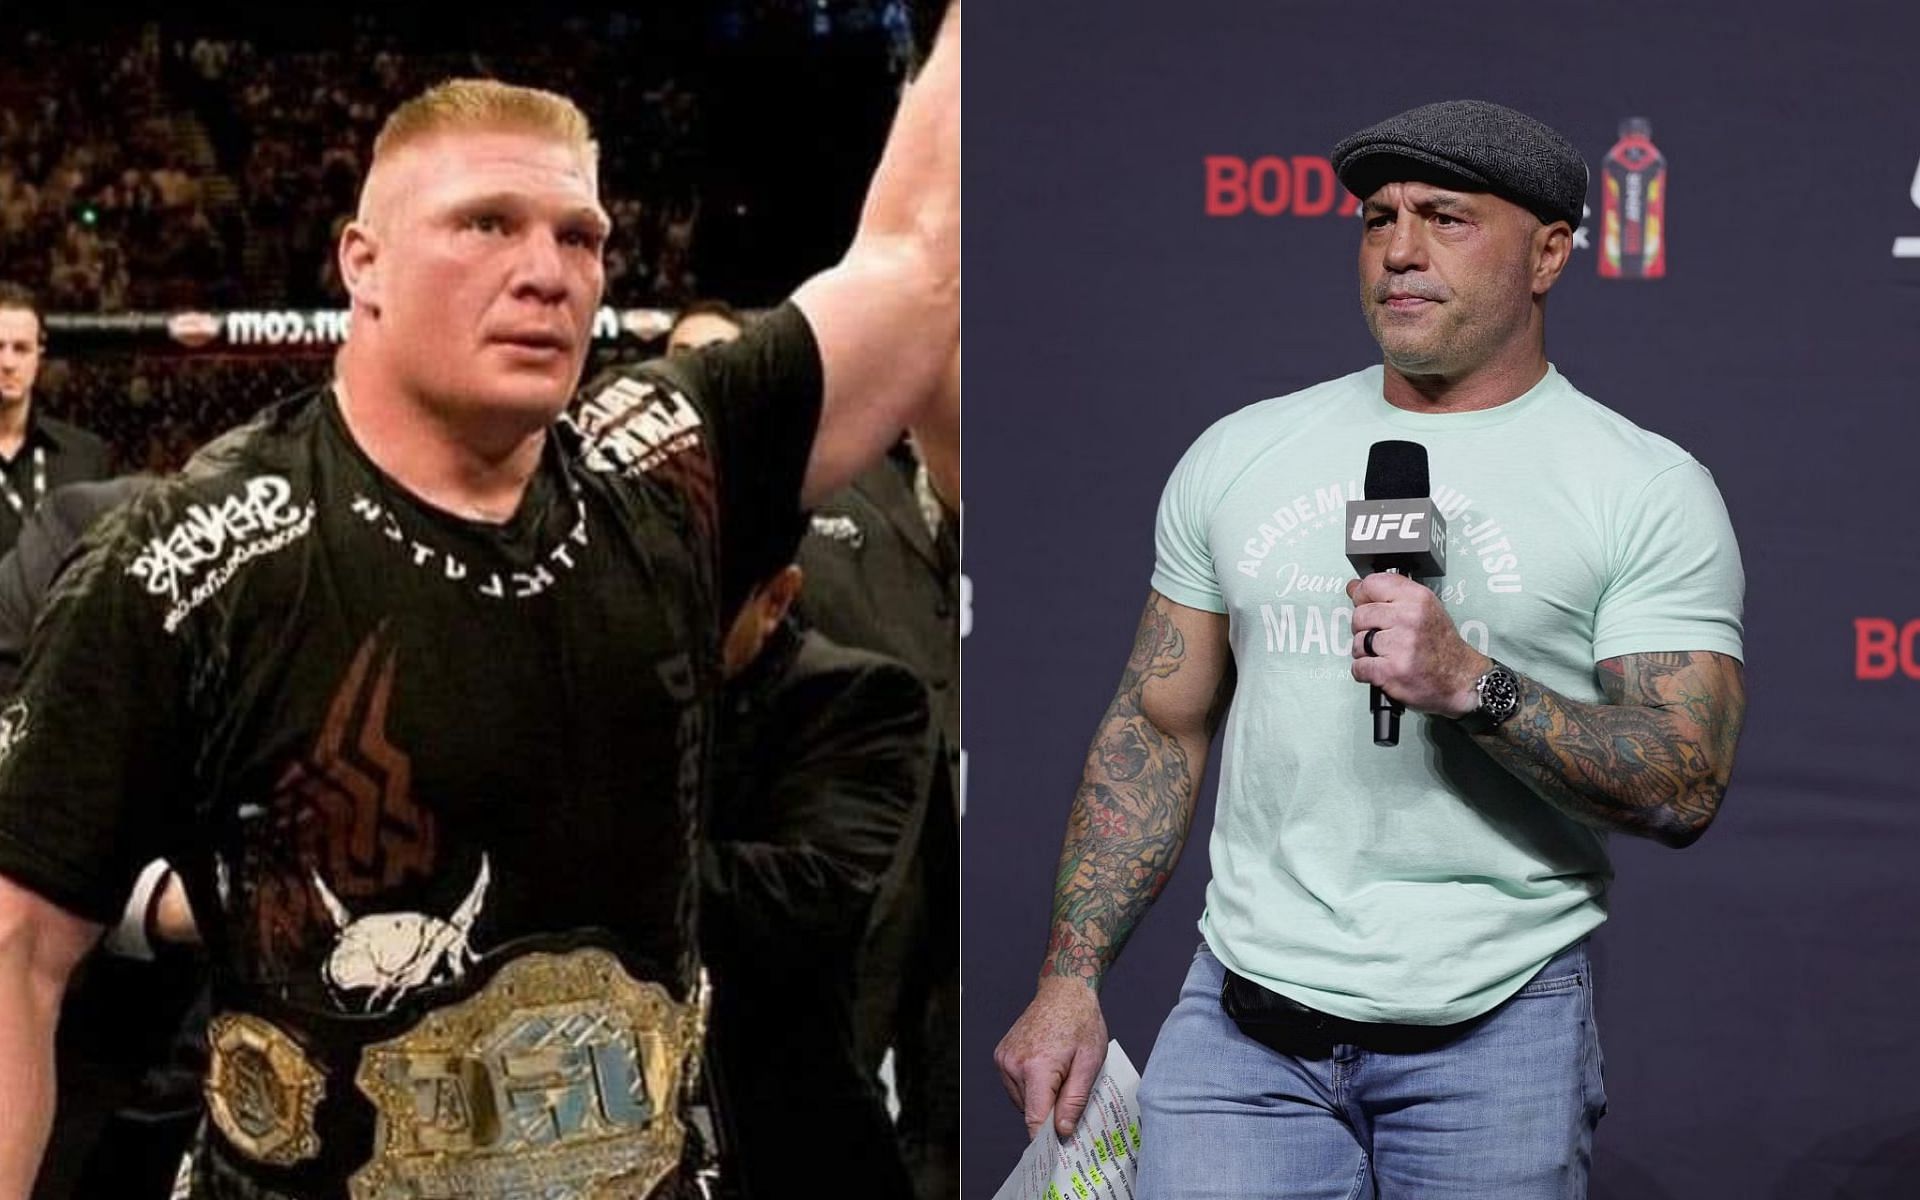 Brock Lesnar (left) and Joe Rogan (right) [Image credits: @TheLincDawg on Twitter]